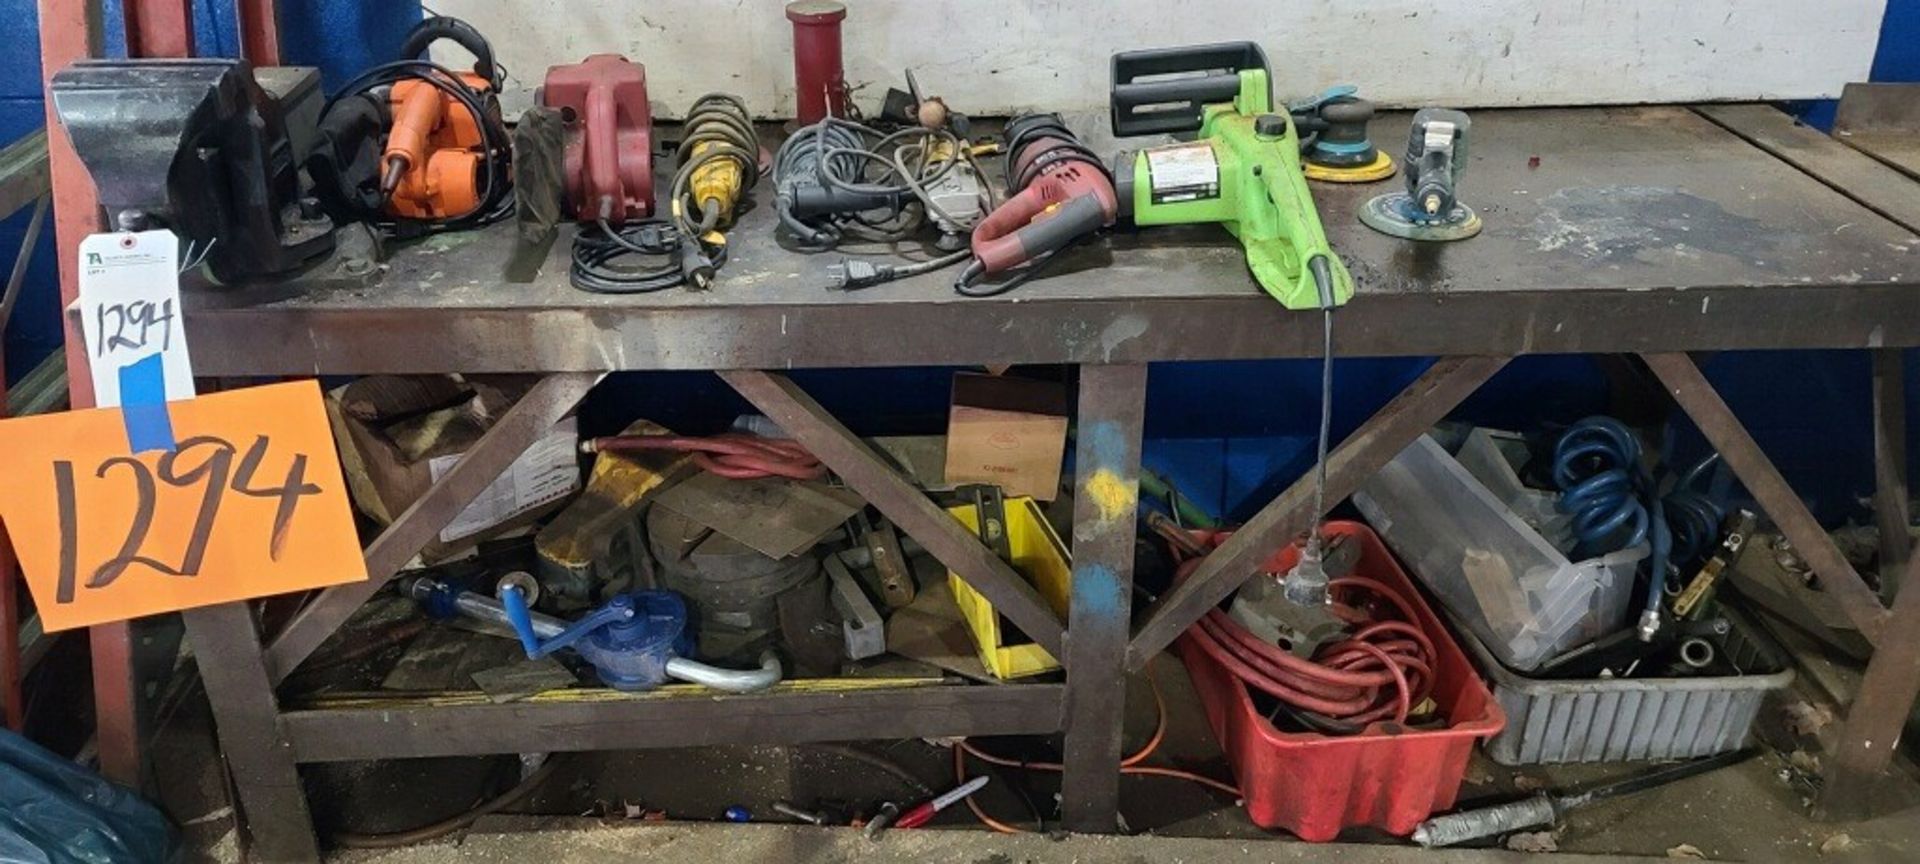 Hnad Tool with Steel Work Table & Vise. LOADING FEE FOR THIS LOT: $100